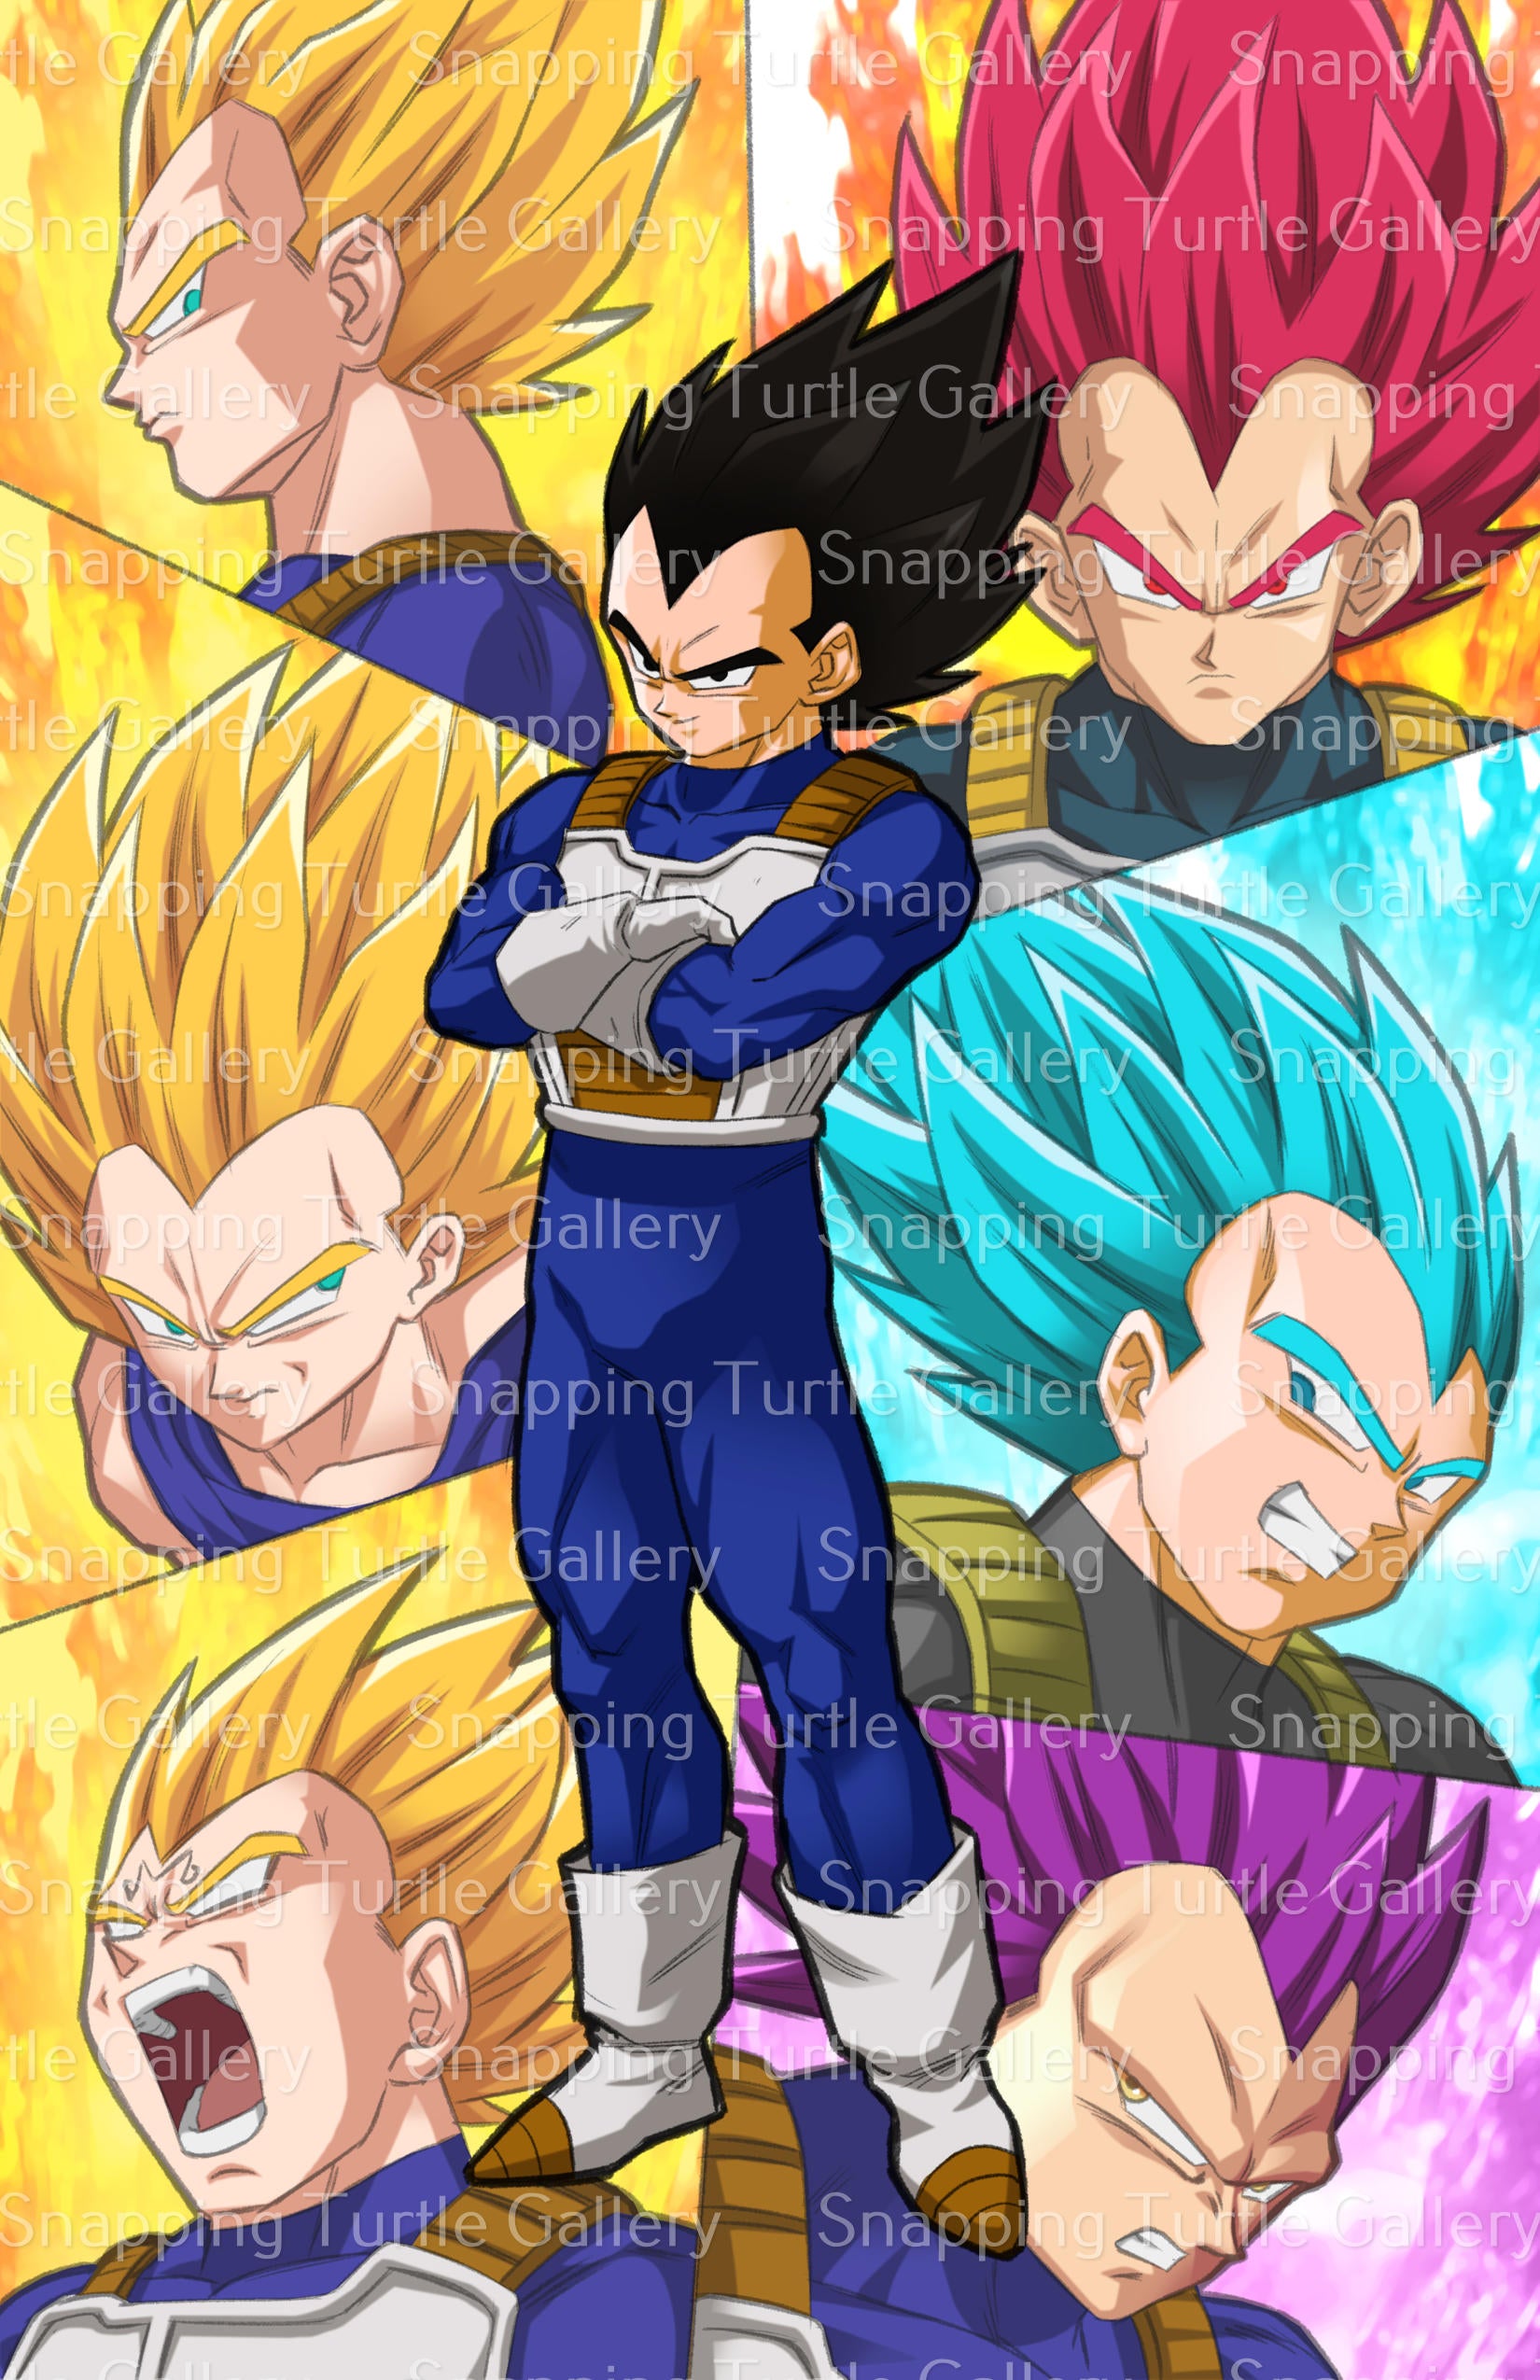 Transformations of Vegeta - Snapping Turtle Gallery